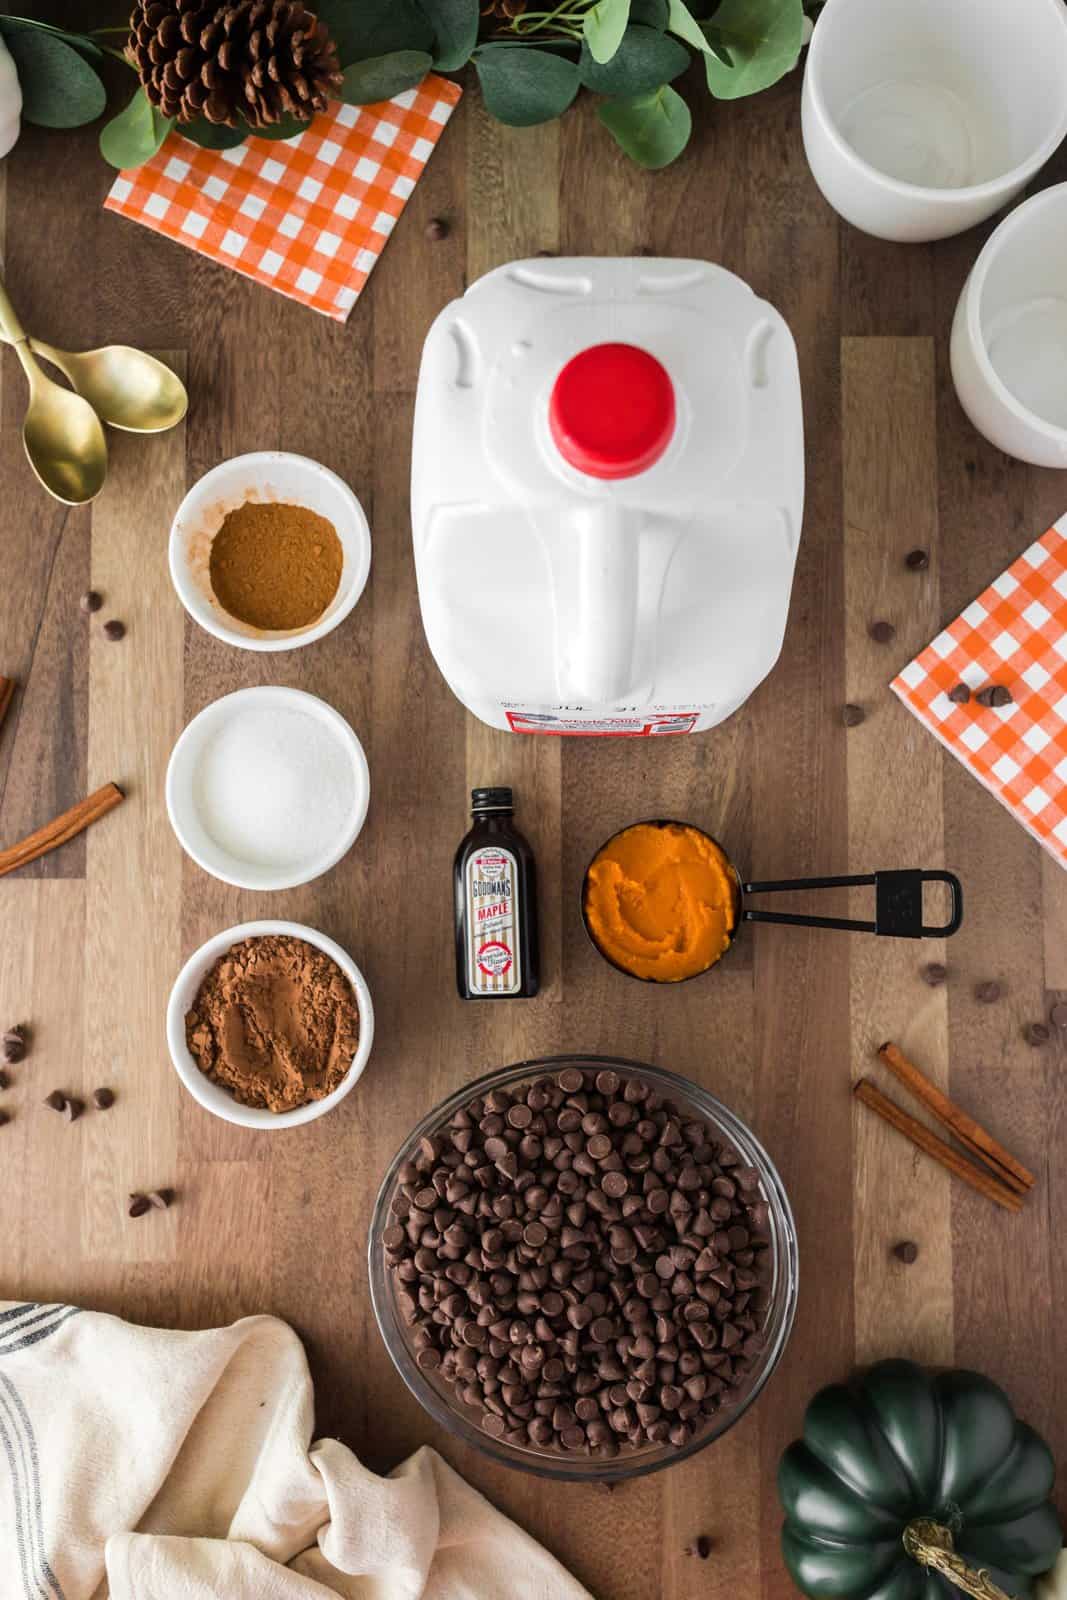 Ingredients needed: whole milk, pumpkin puree, unsweetened cocoa powder, granulated sugar, milk chocolate chips, pumpkin pie spice, marshmallows (optional), whipped cream (optional) and chocolate sauce (optional).